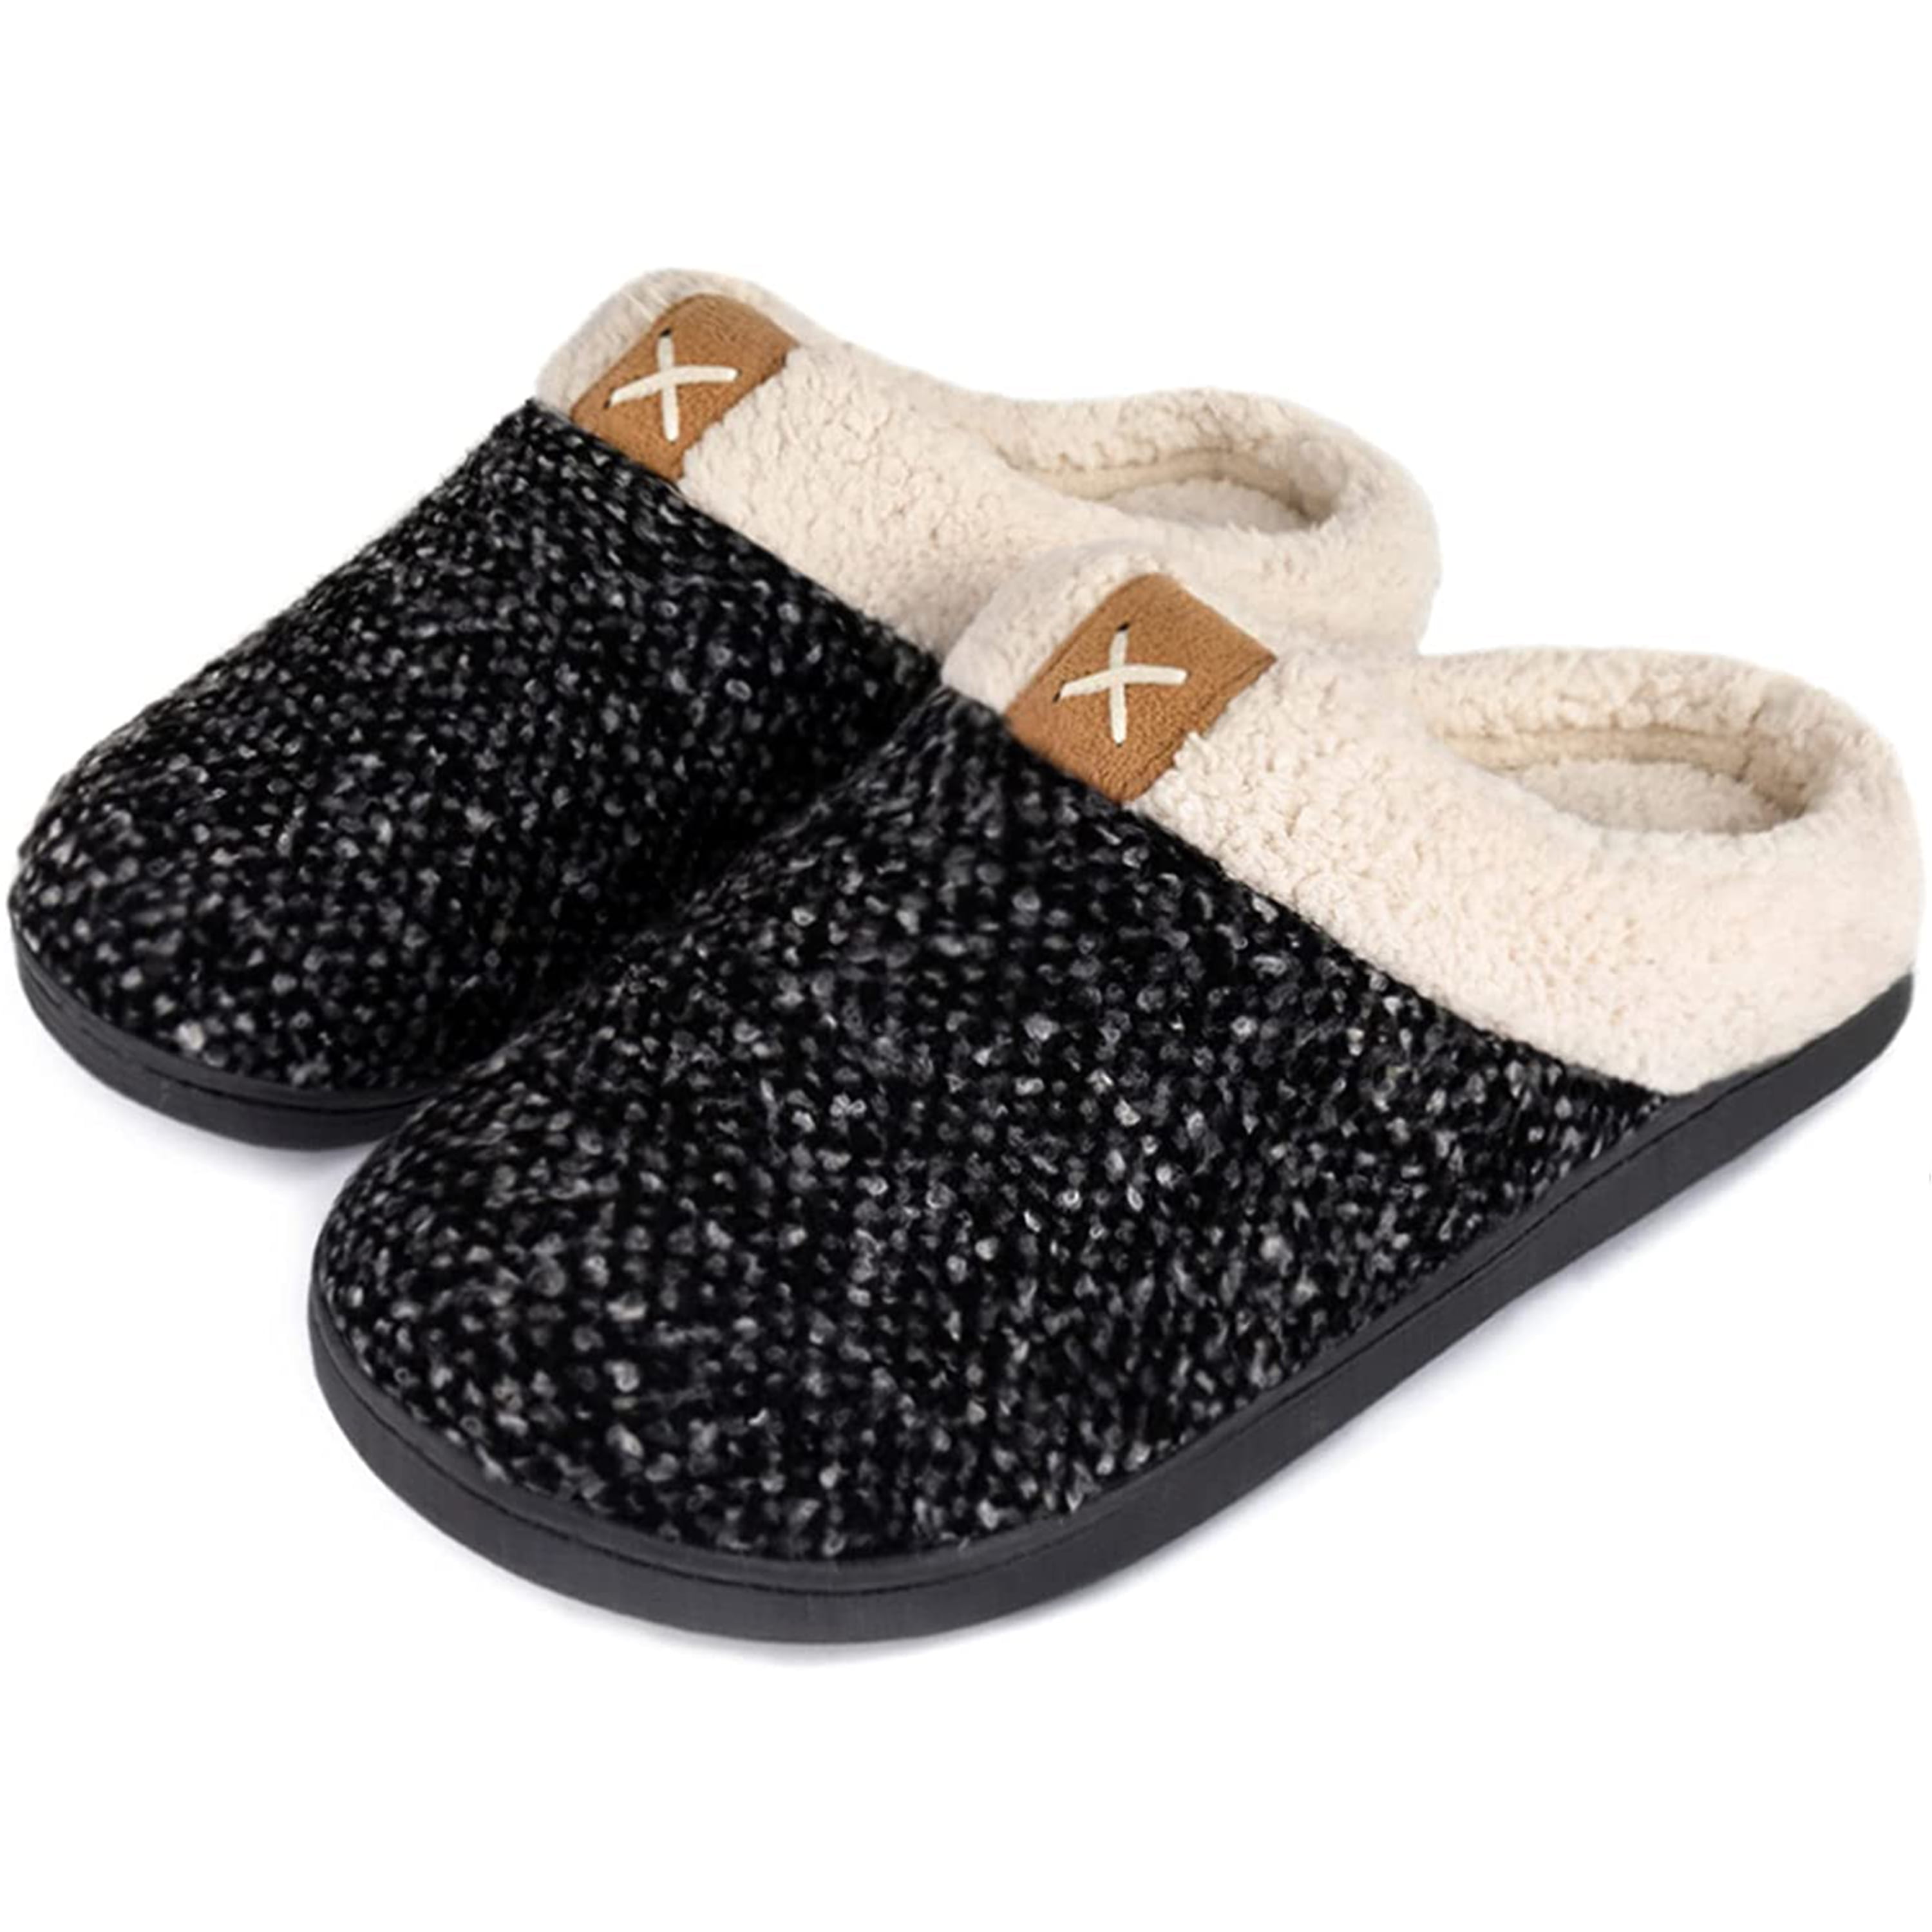 Mens & Womens Cotton Knit Memory Foam Slippers Light Weight House Shoes with Anti-Skid Sole